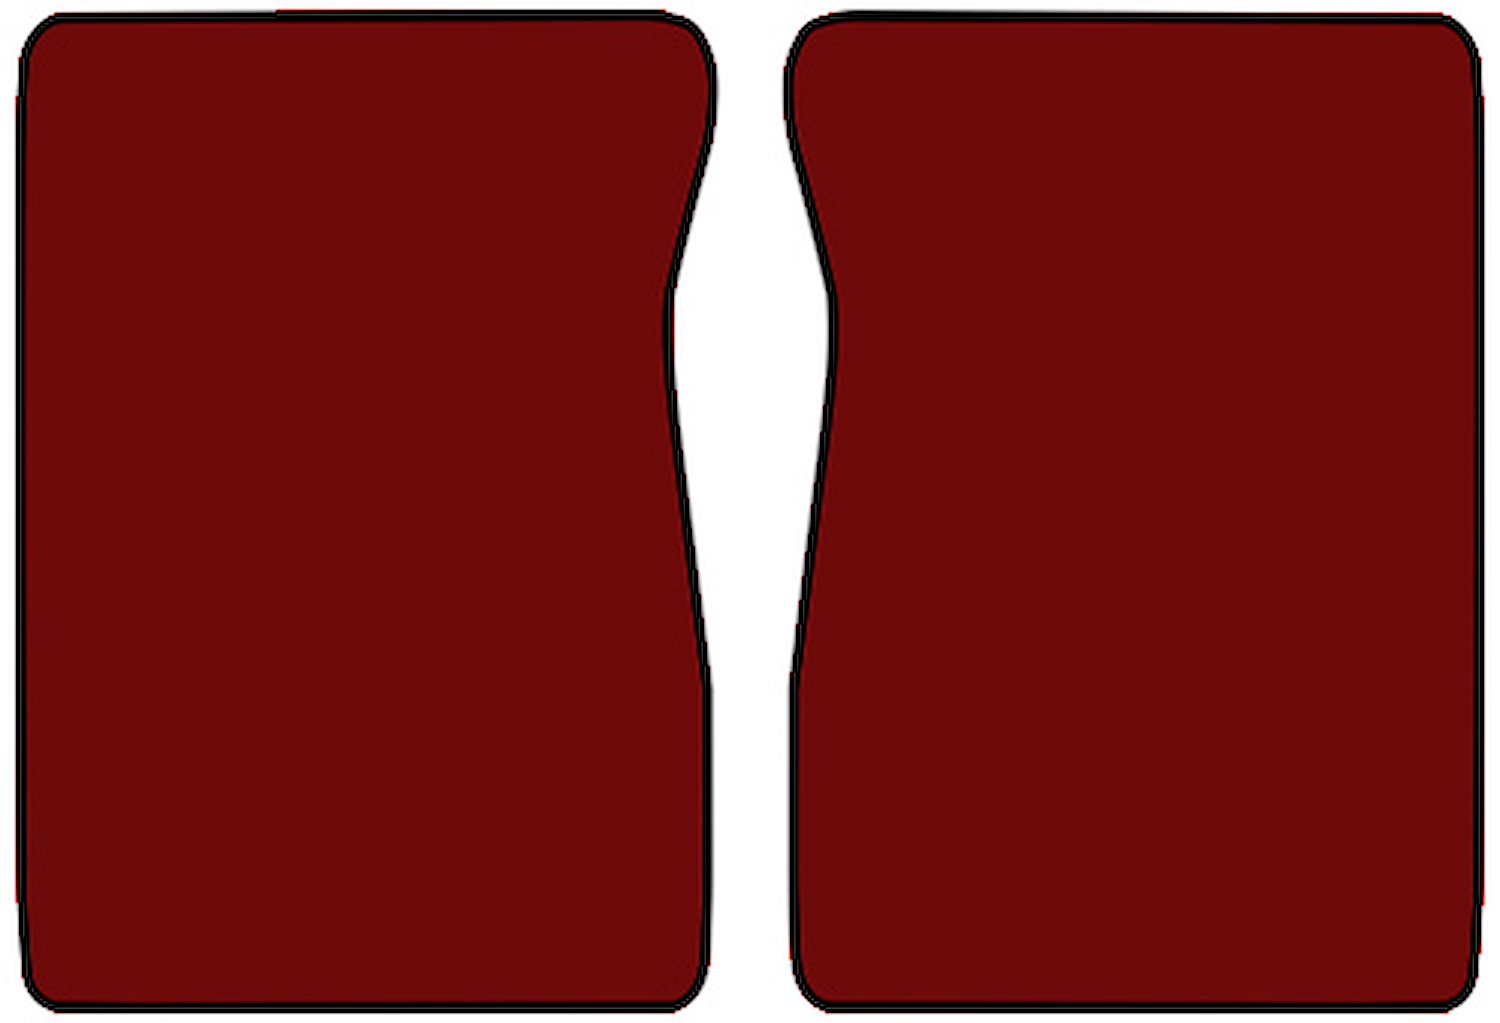 Molded Cut Pile Floor Mats for 1975-1980 C/K Series Chevrolet and GMC Trucks [2-Piece, Dark Red]